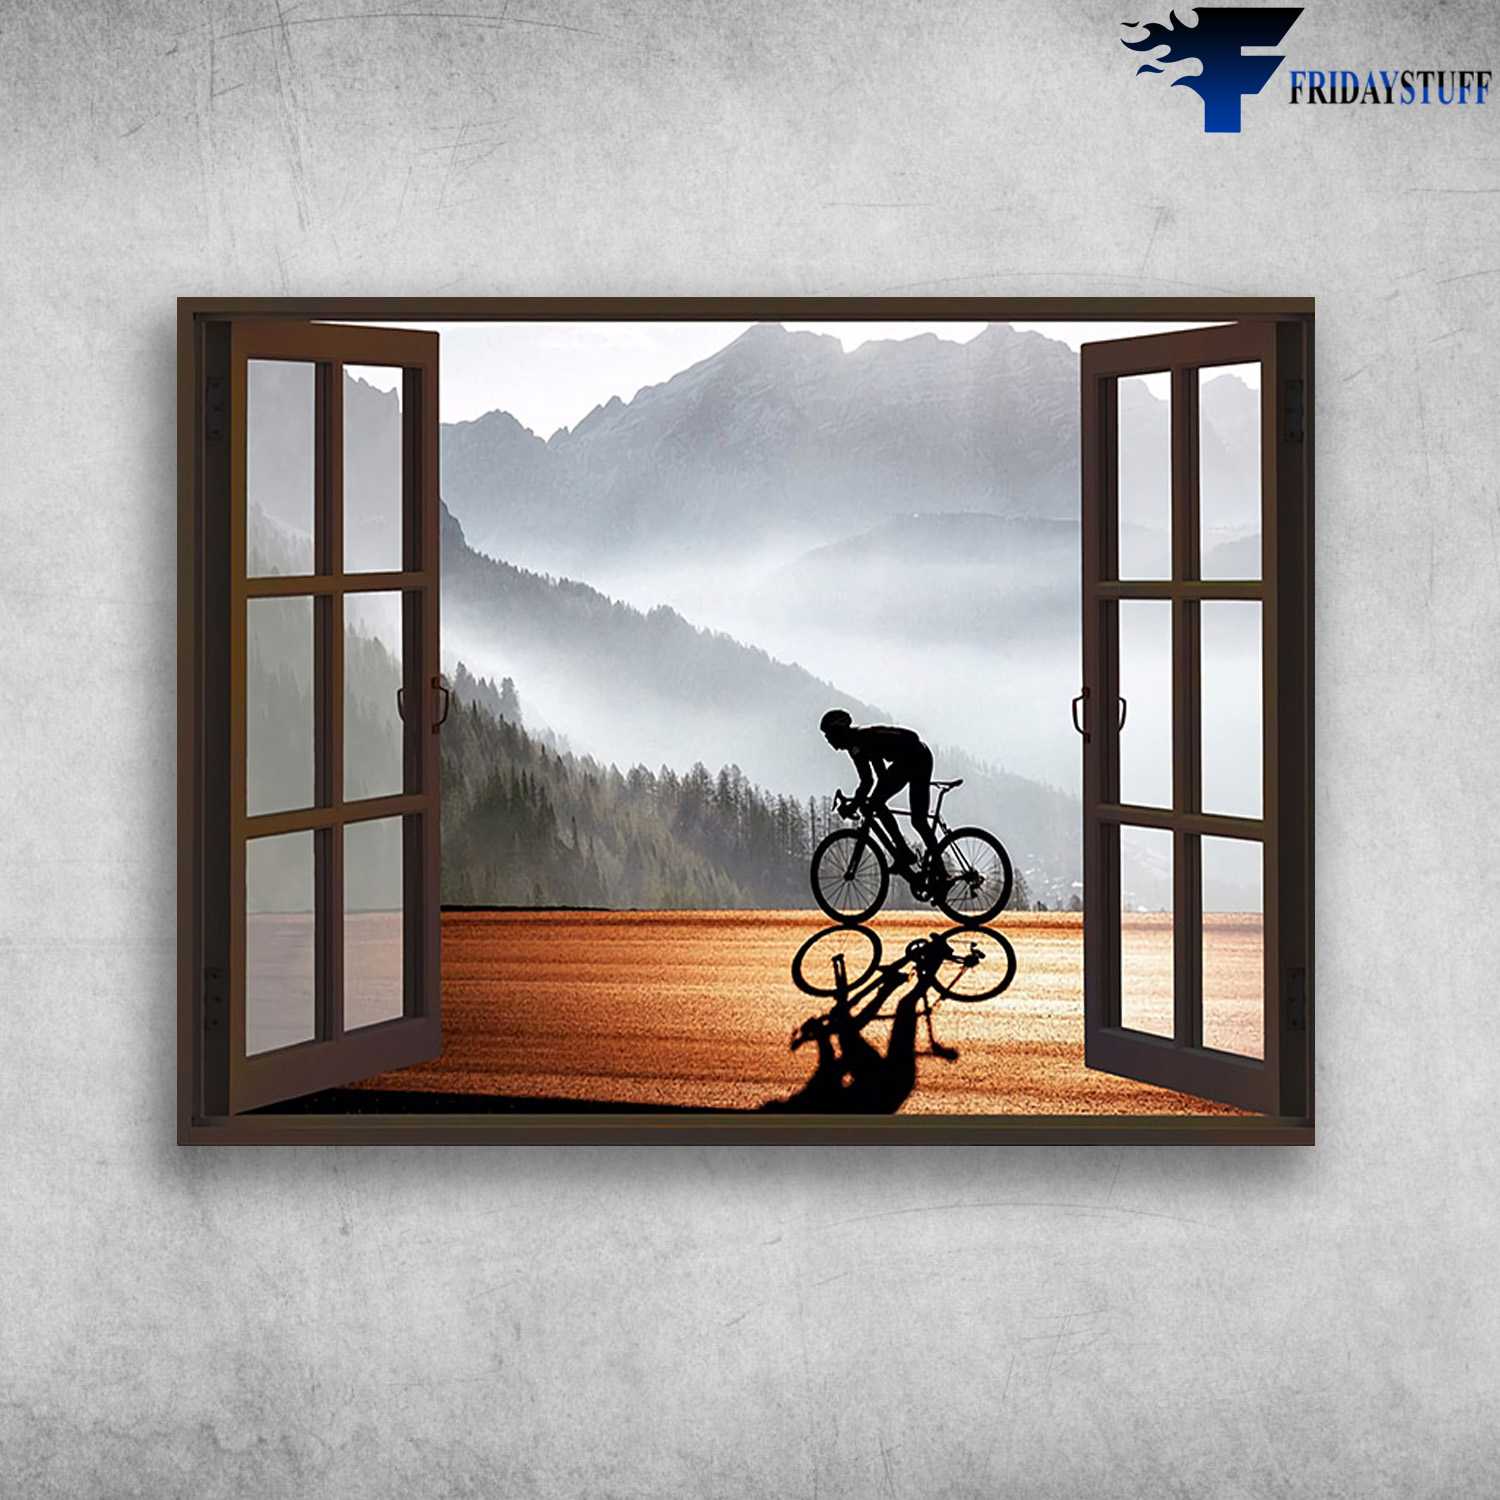 Cycling Man, Biker Lover, Window Poster, Bicycle Riding